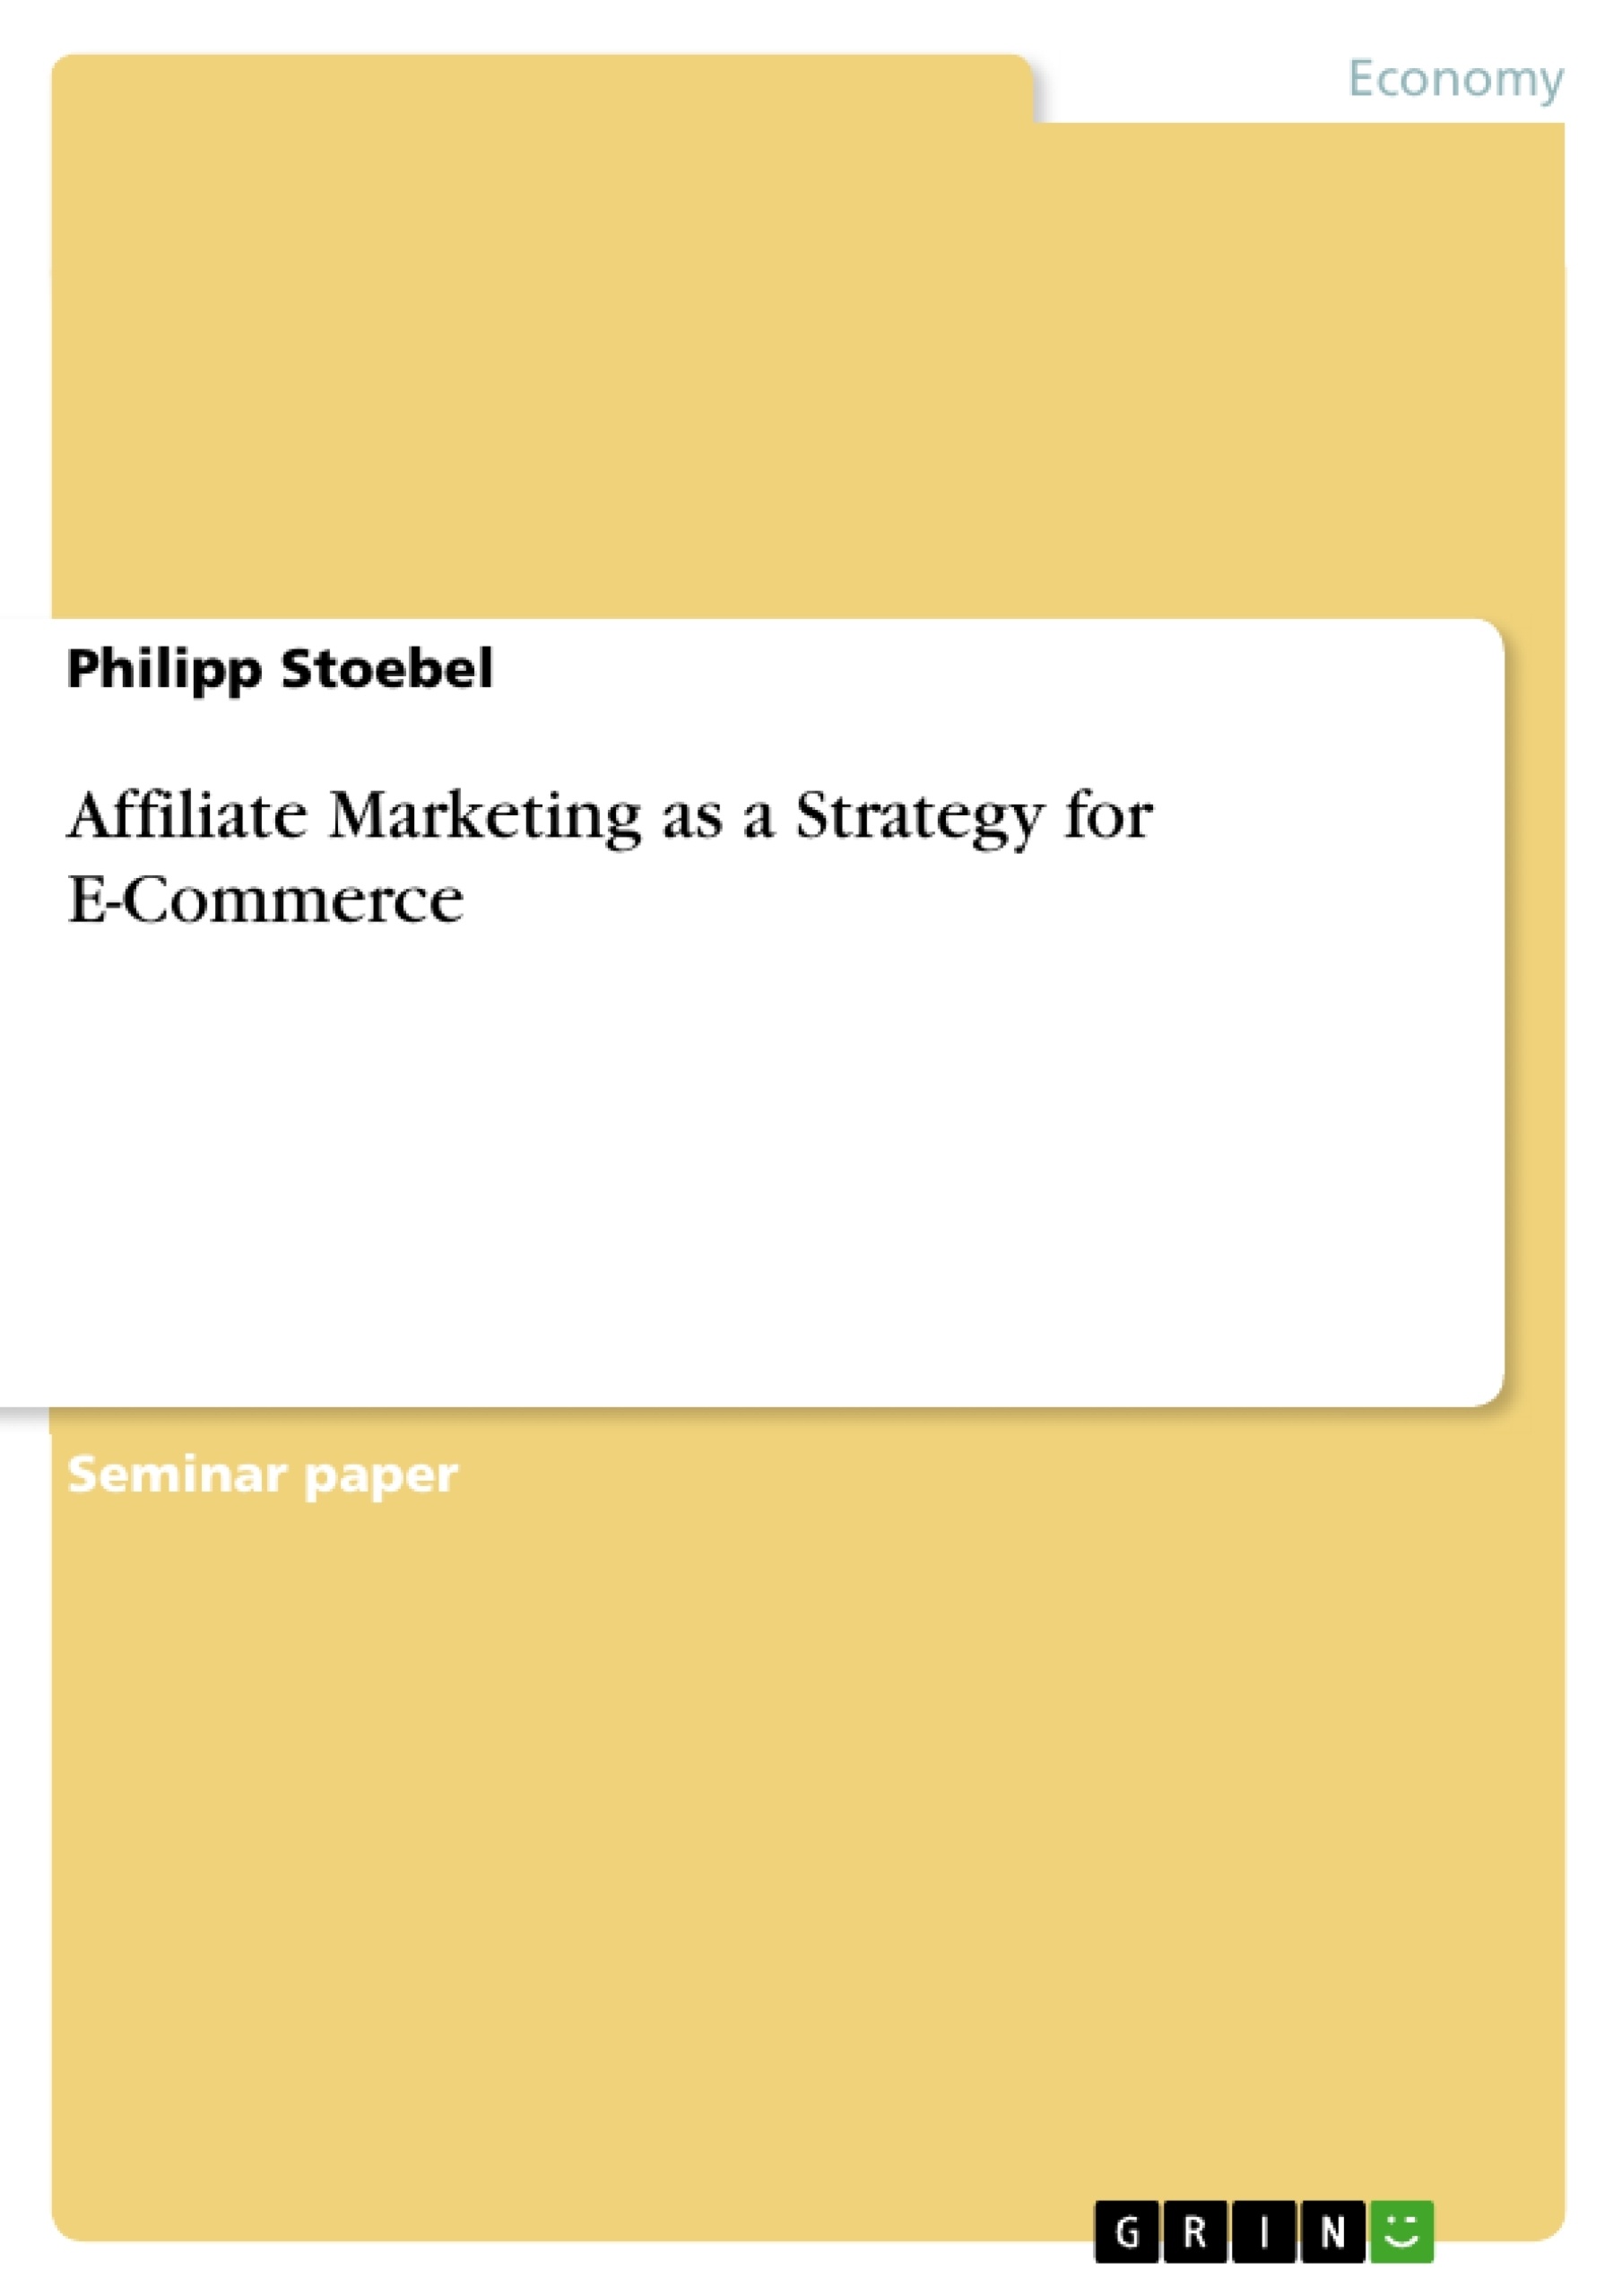 Title: Affiliate Marketing as a Strategy for E-Commerce